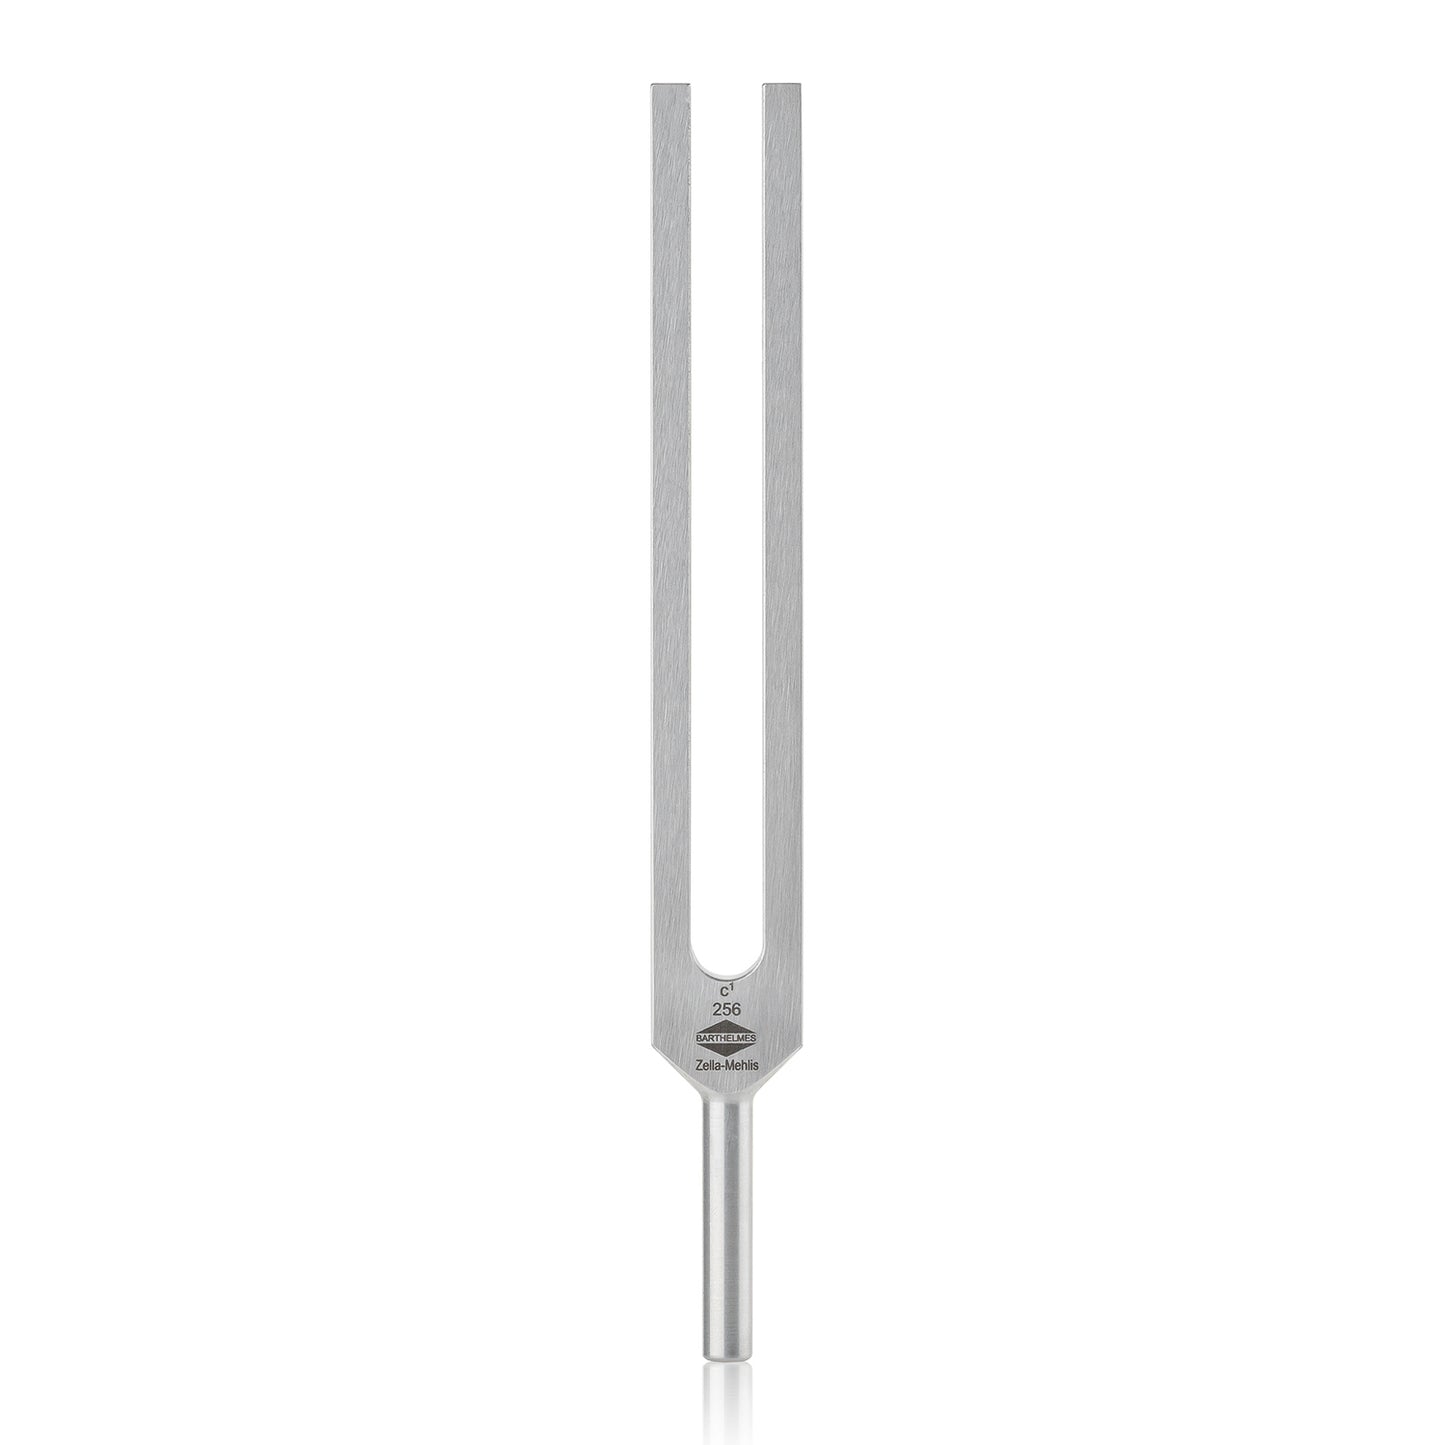 Barthelmes tuning fork c1 256 Hz for ear doctors according to Hartmann